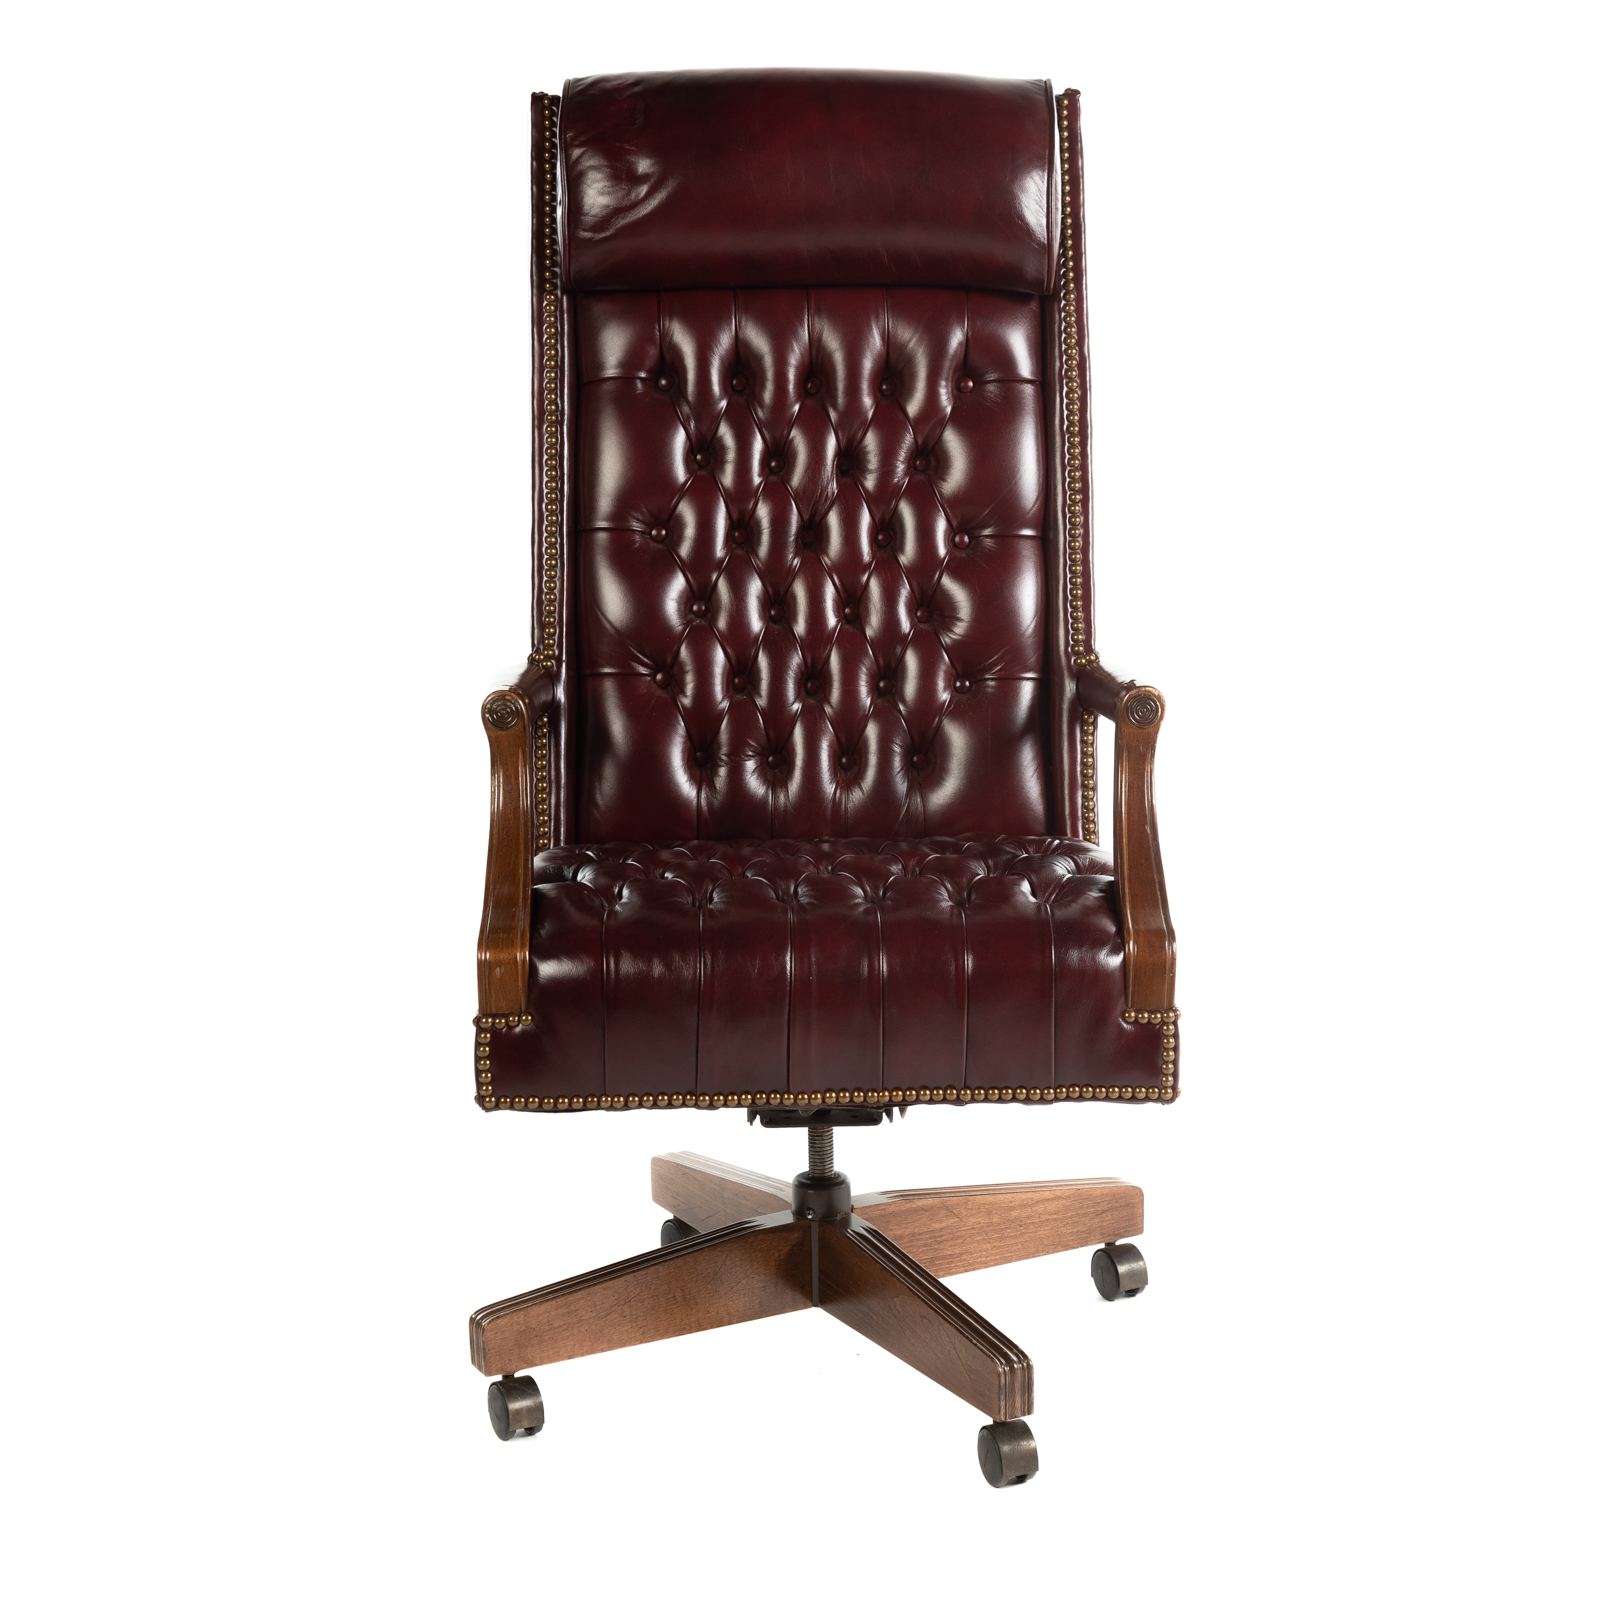 HICKORY CHAIR BURGUNDY LEATHER 36a9af